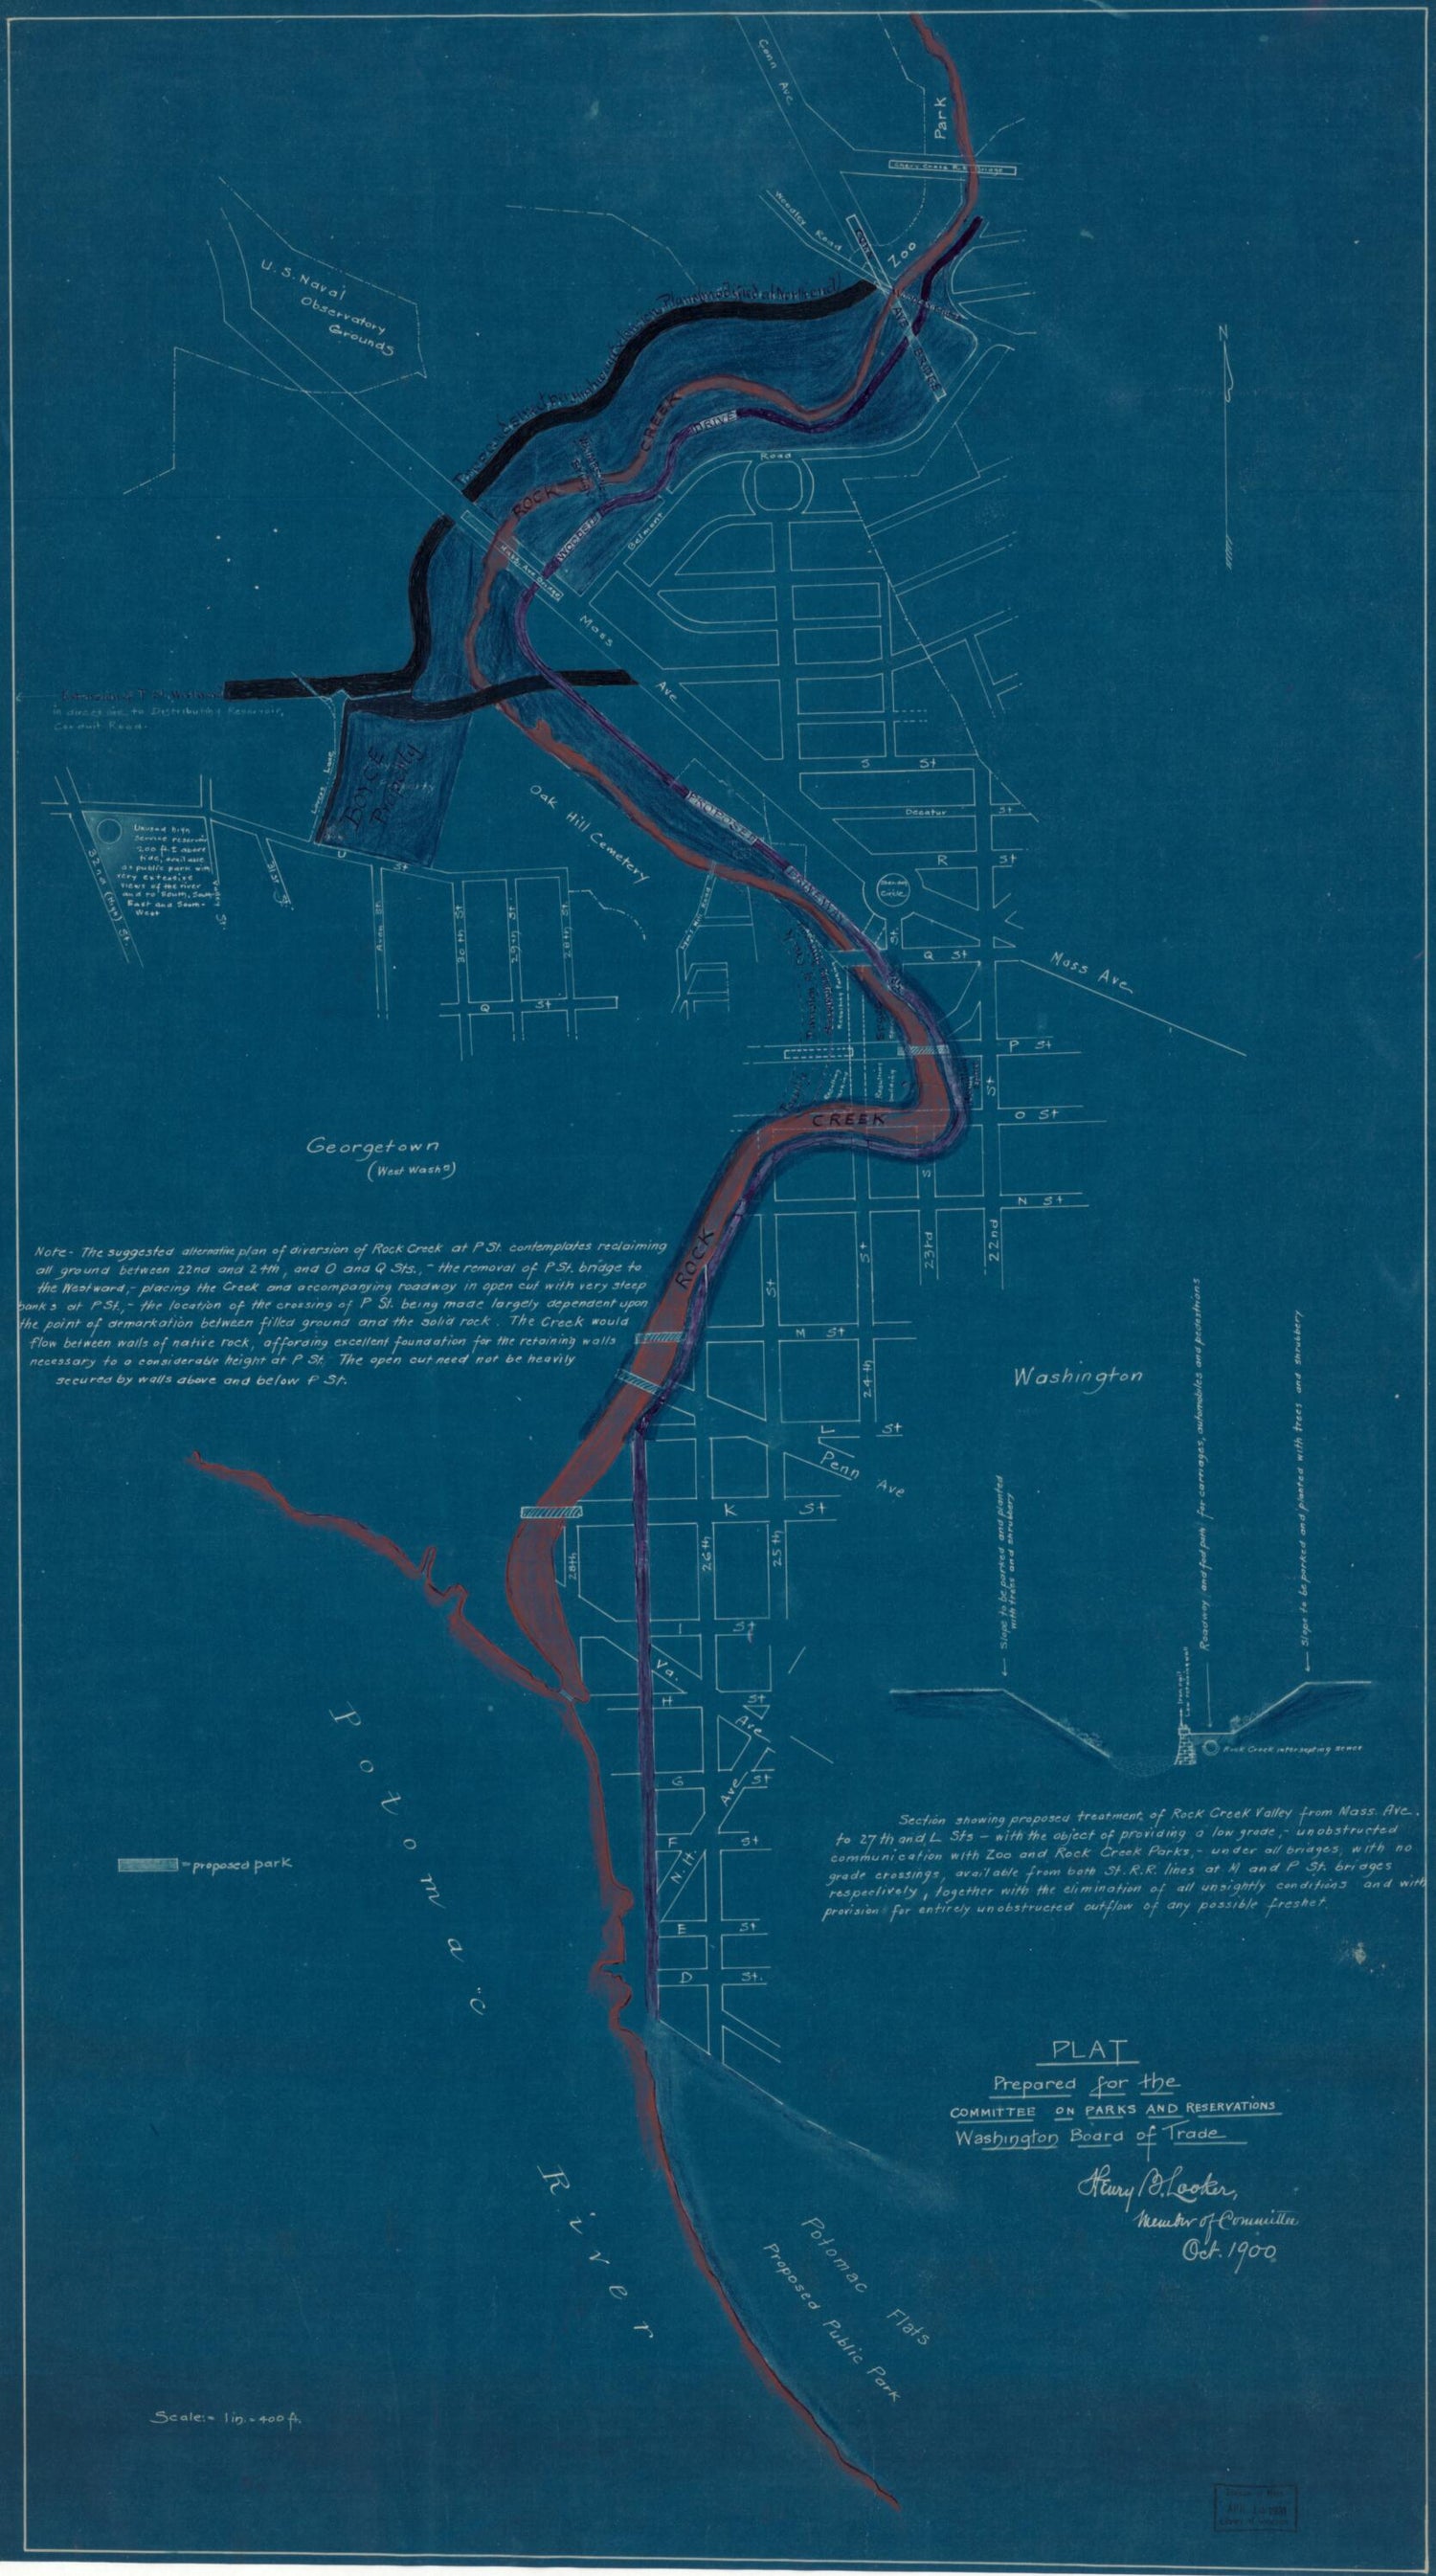 This old map of Plat Prepared for the Committee On Parks and Reservations, Washington Board of Trade : Rock Creek and Potomac Parkway, Washington D.C. from 1900 was created by Henry B. Looker,  Washington Board of Trade. Committee on Parks and Reservatio